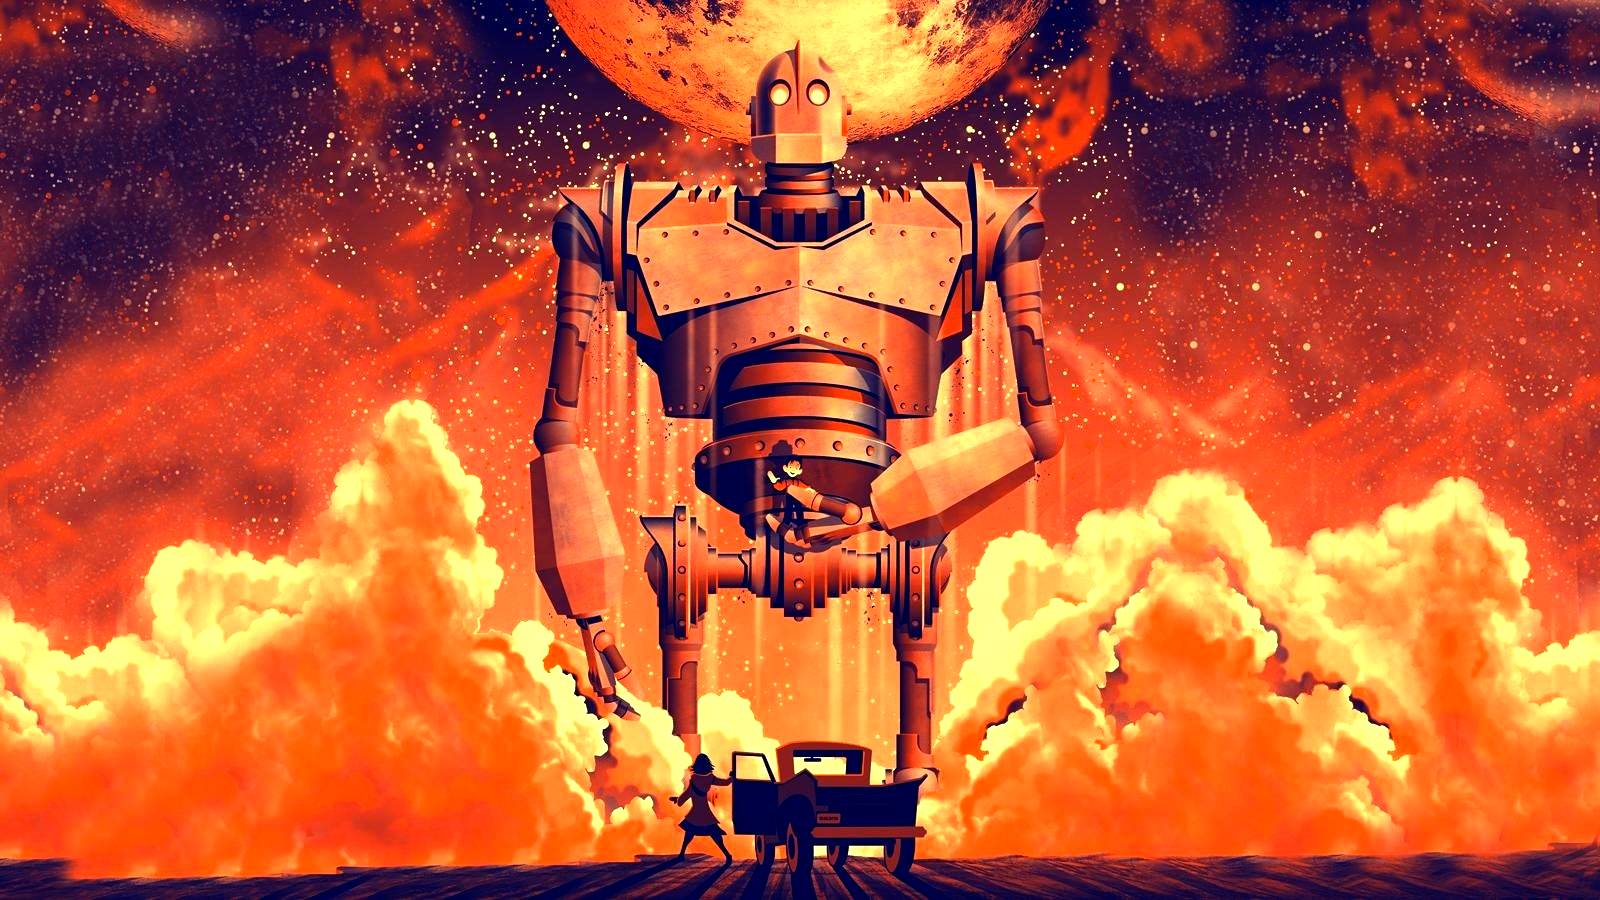 The Iron Giant Le Cinema Paradiso Blu Ray Reviews And Dvd Reviews